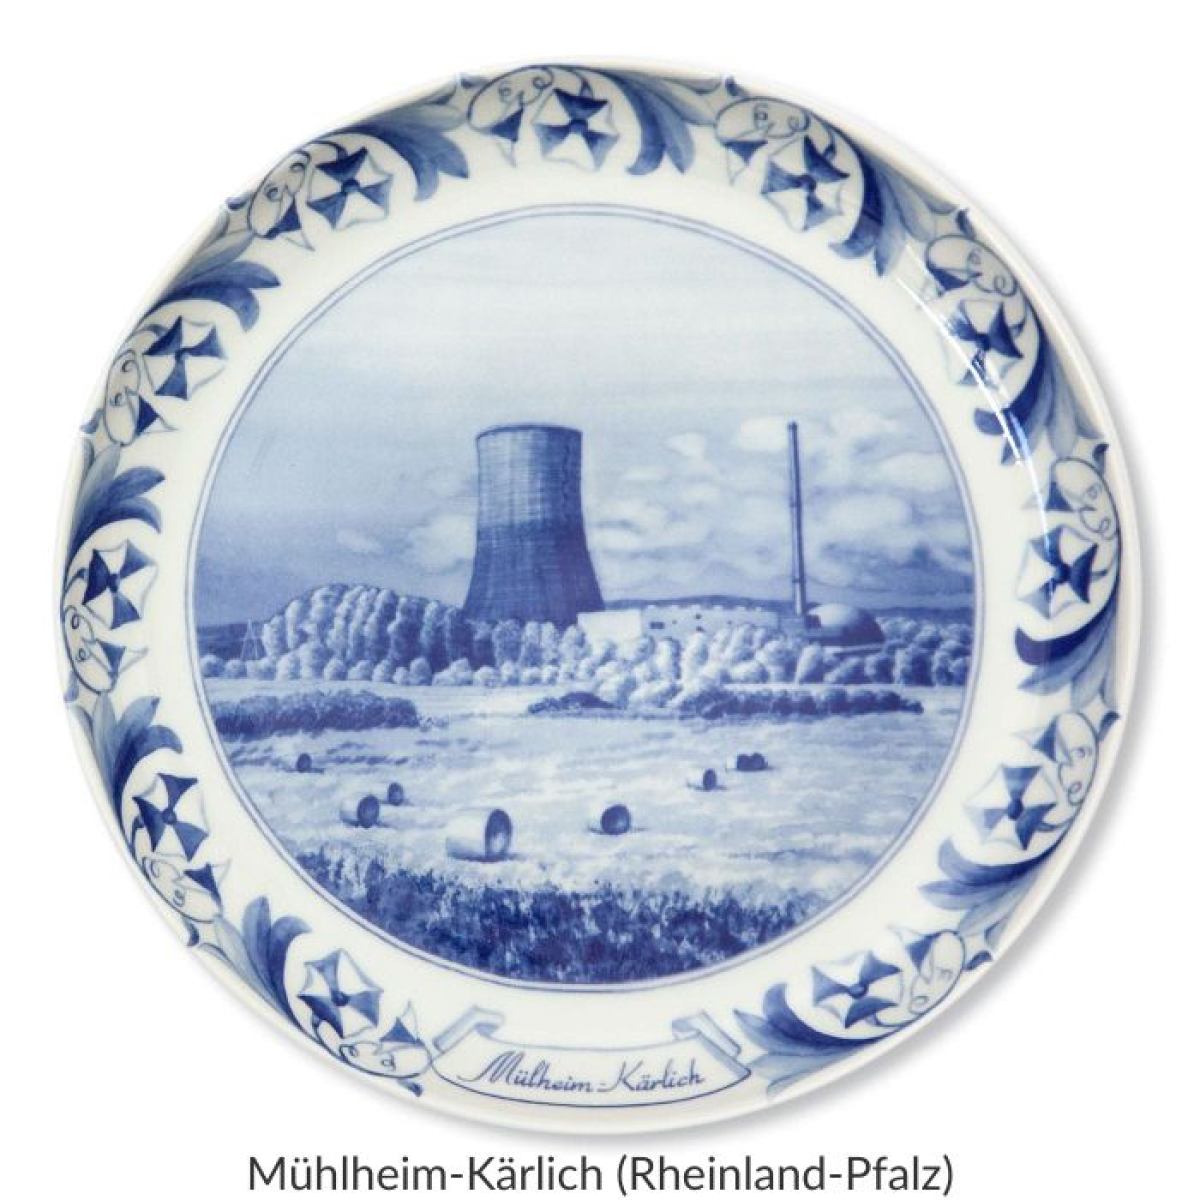 Set of Five Nuclear Plates made of Porcelain